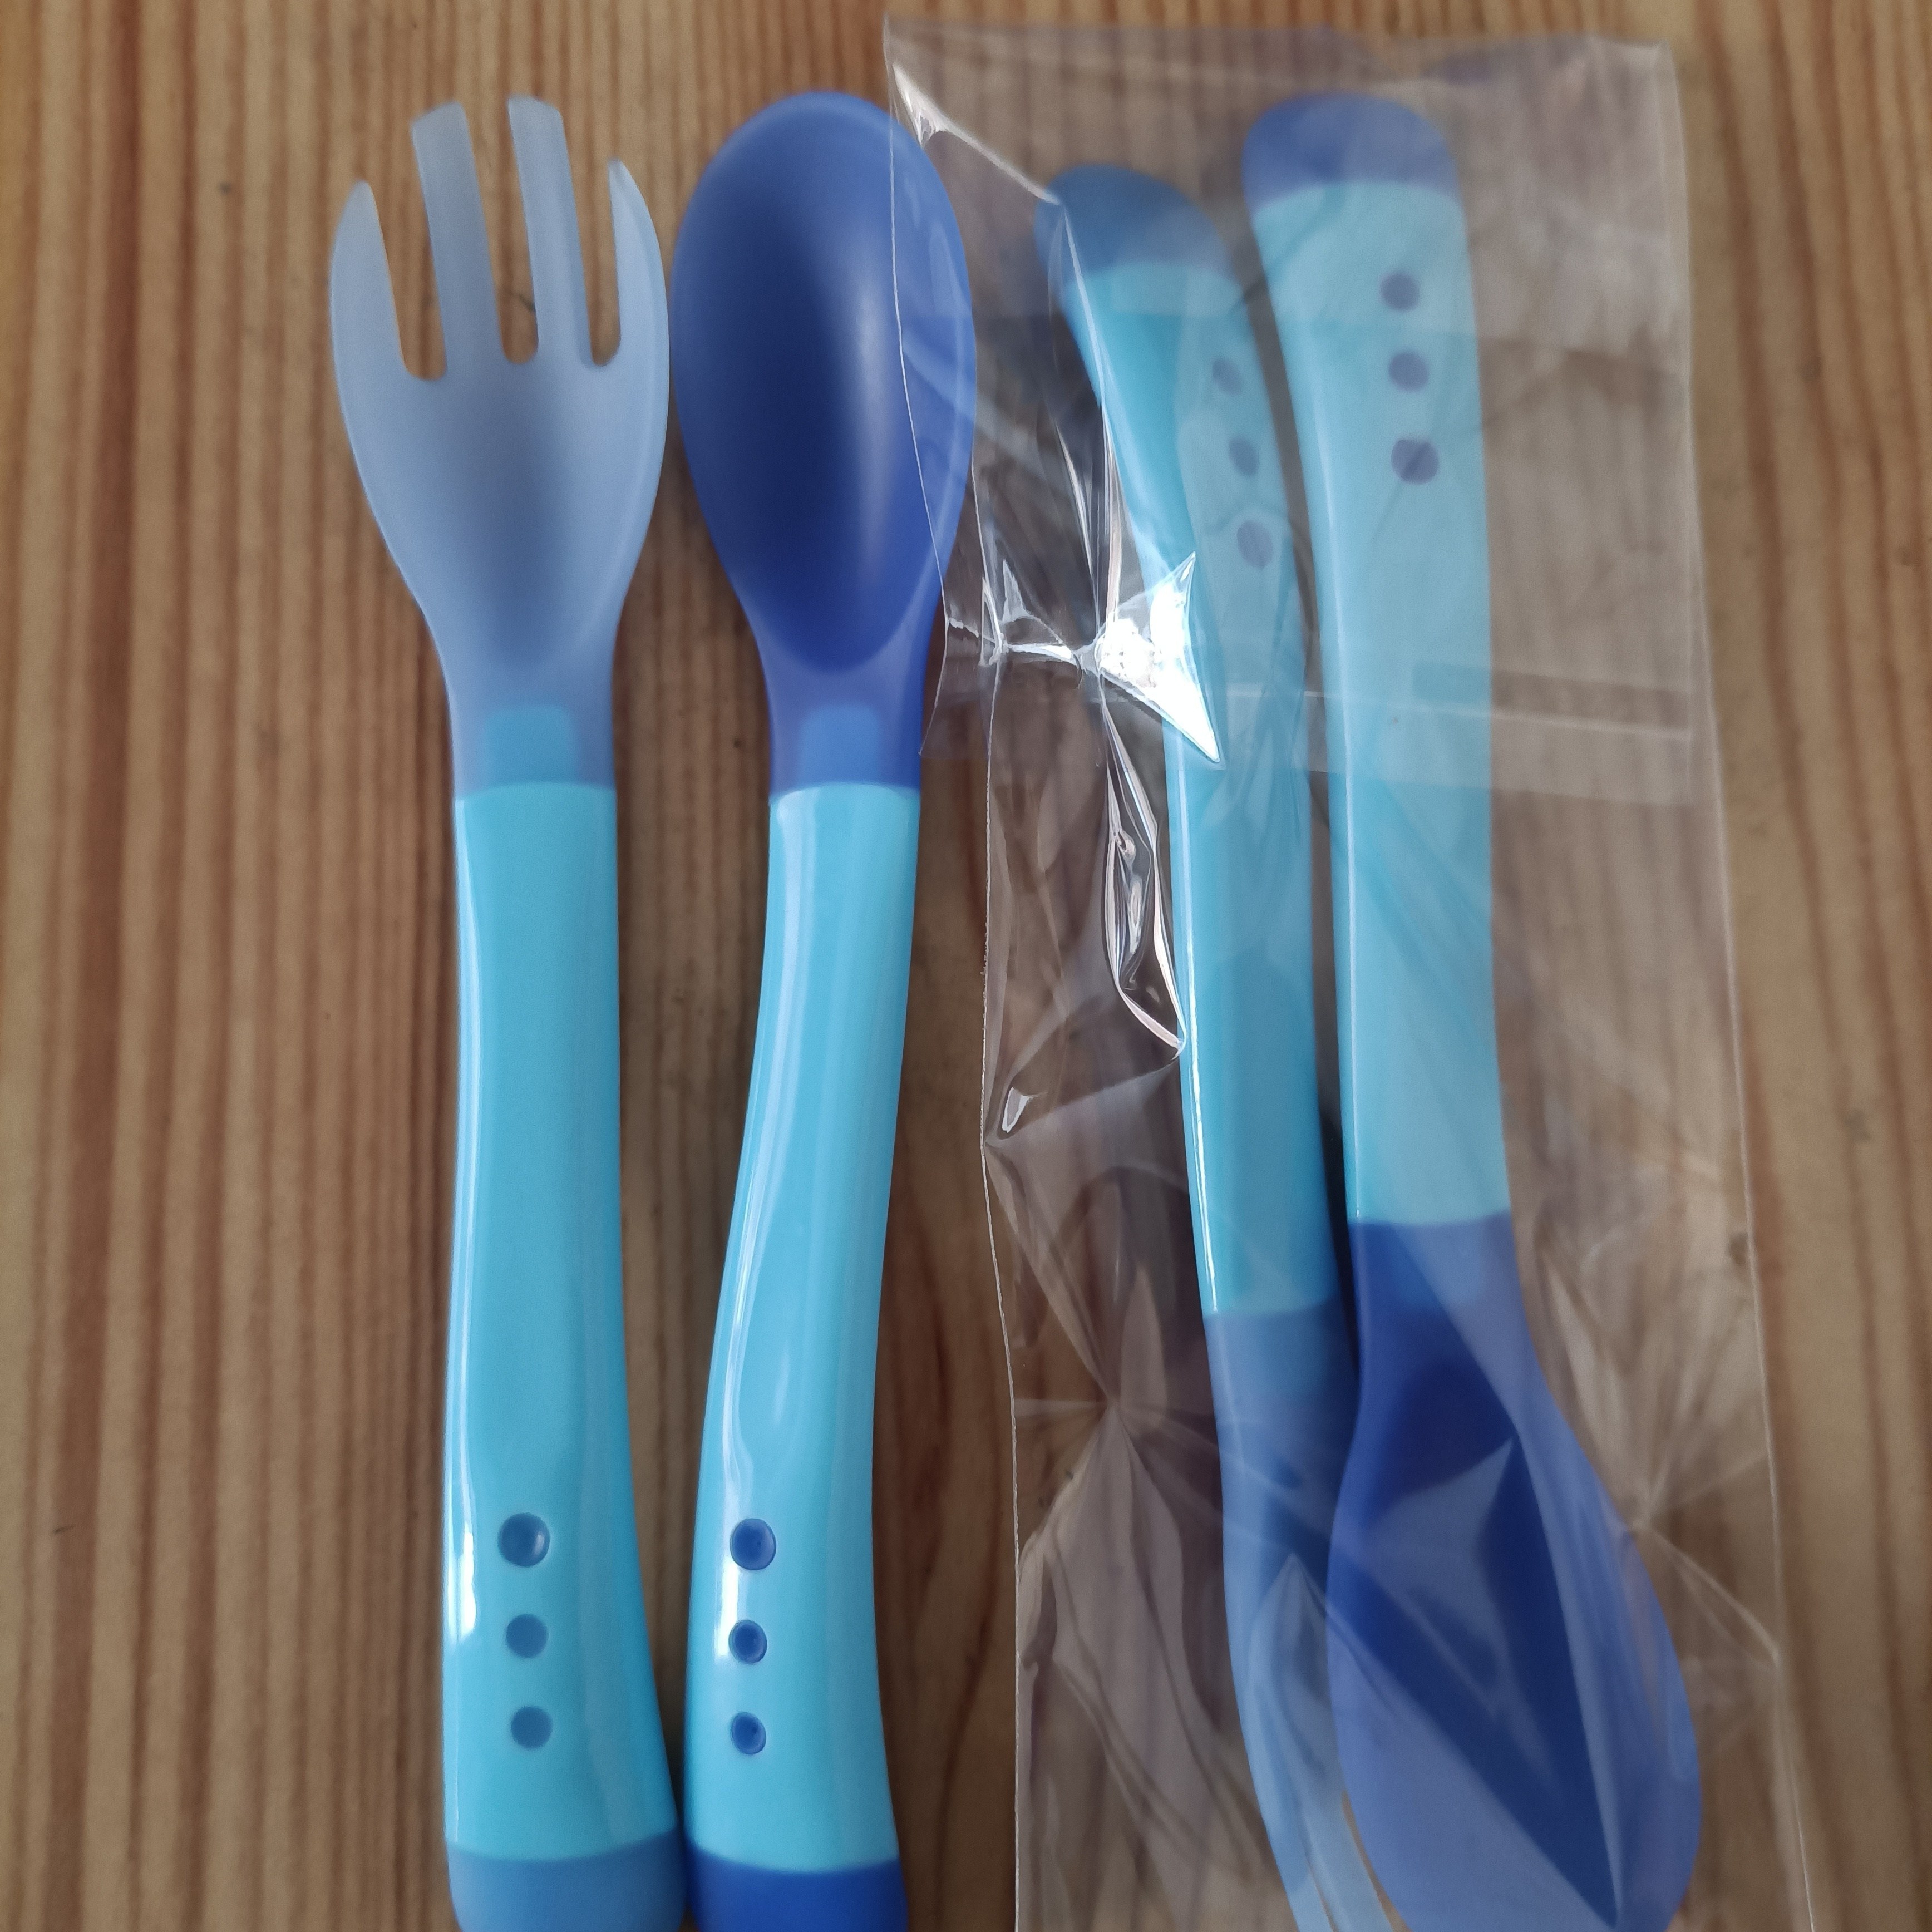 Babyware Made in USA First Self Feeding Spoon Fork Utensil Set for Baby Led  Weaning and Toddlers BPA Free (blue) 